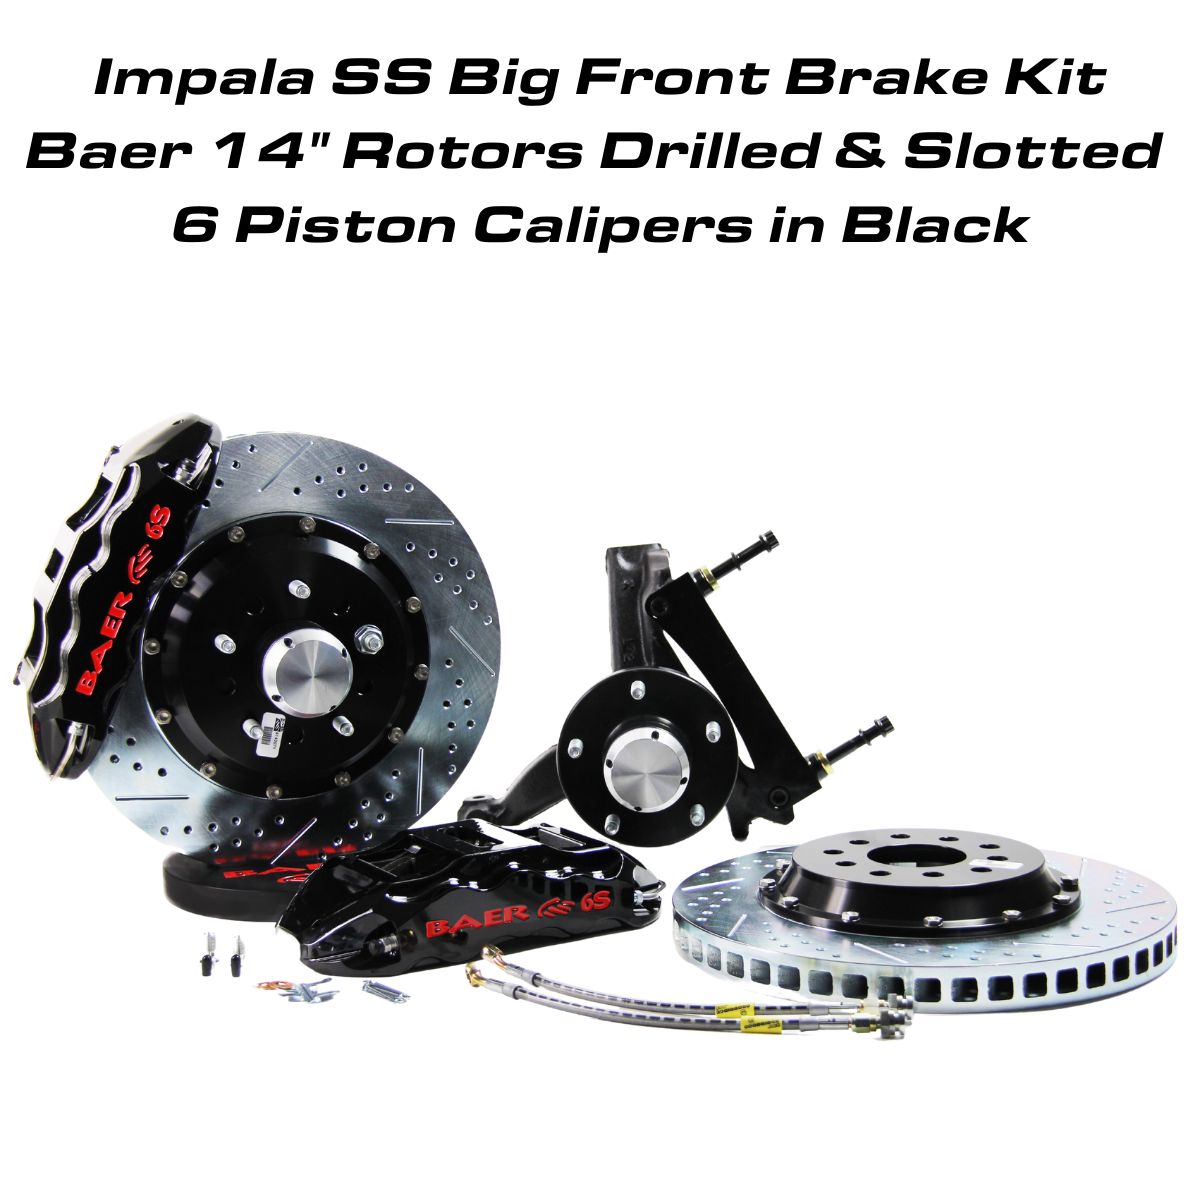 Impala SS Big Front Brake Kit, 14 Inch Baer Rotors, 6 Piston Forged 6S Calipers - Drilled and Slotted, Black Calipers